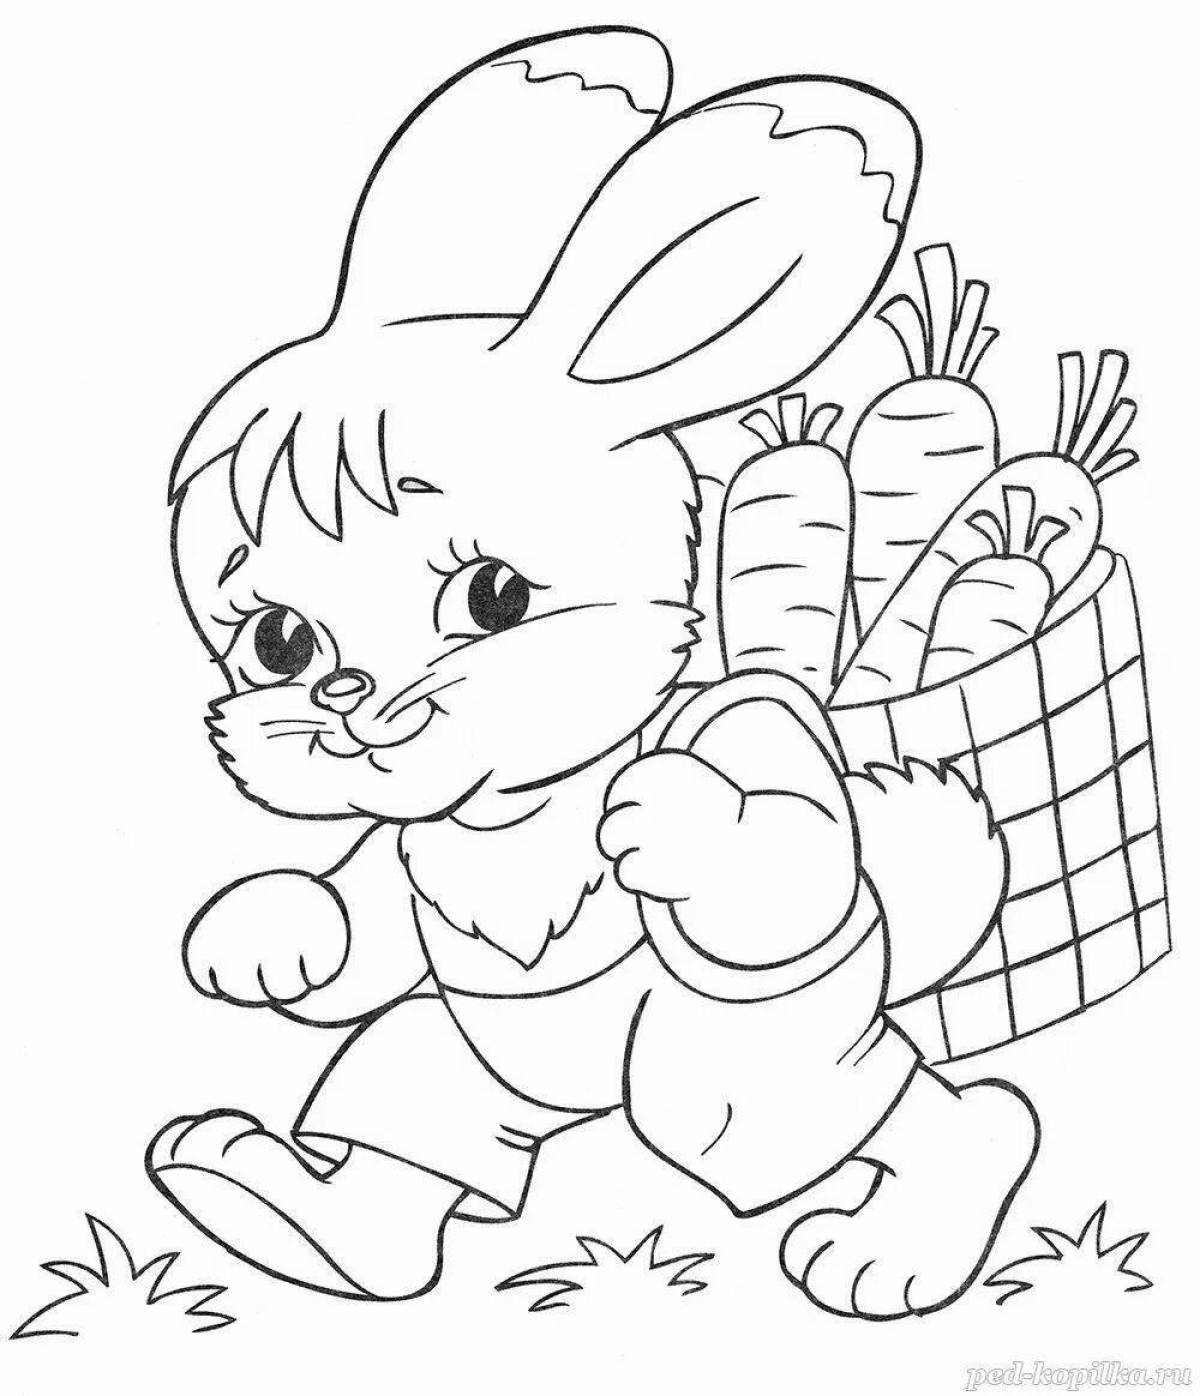 Happy coloring hare 2023 new year